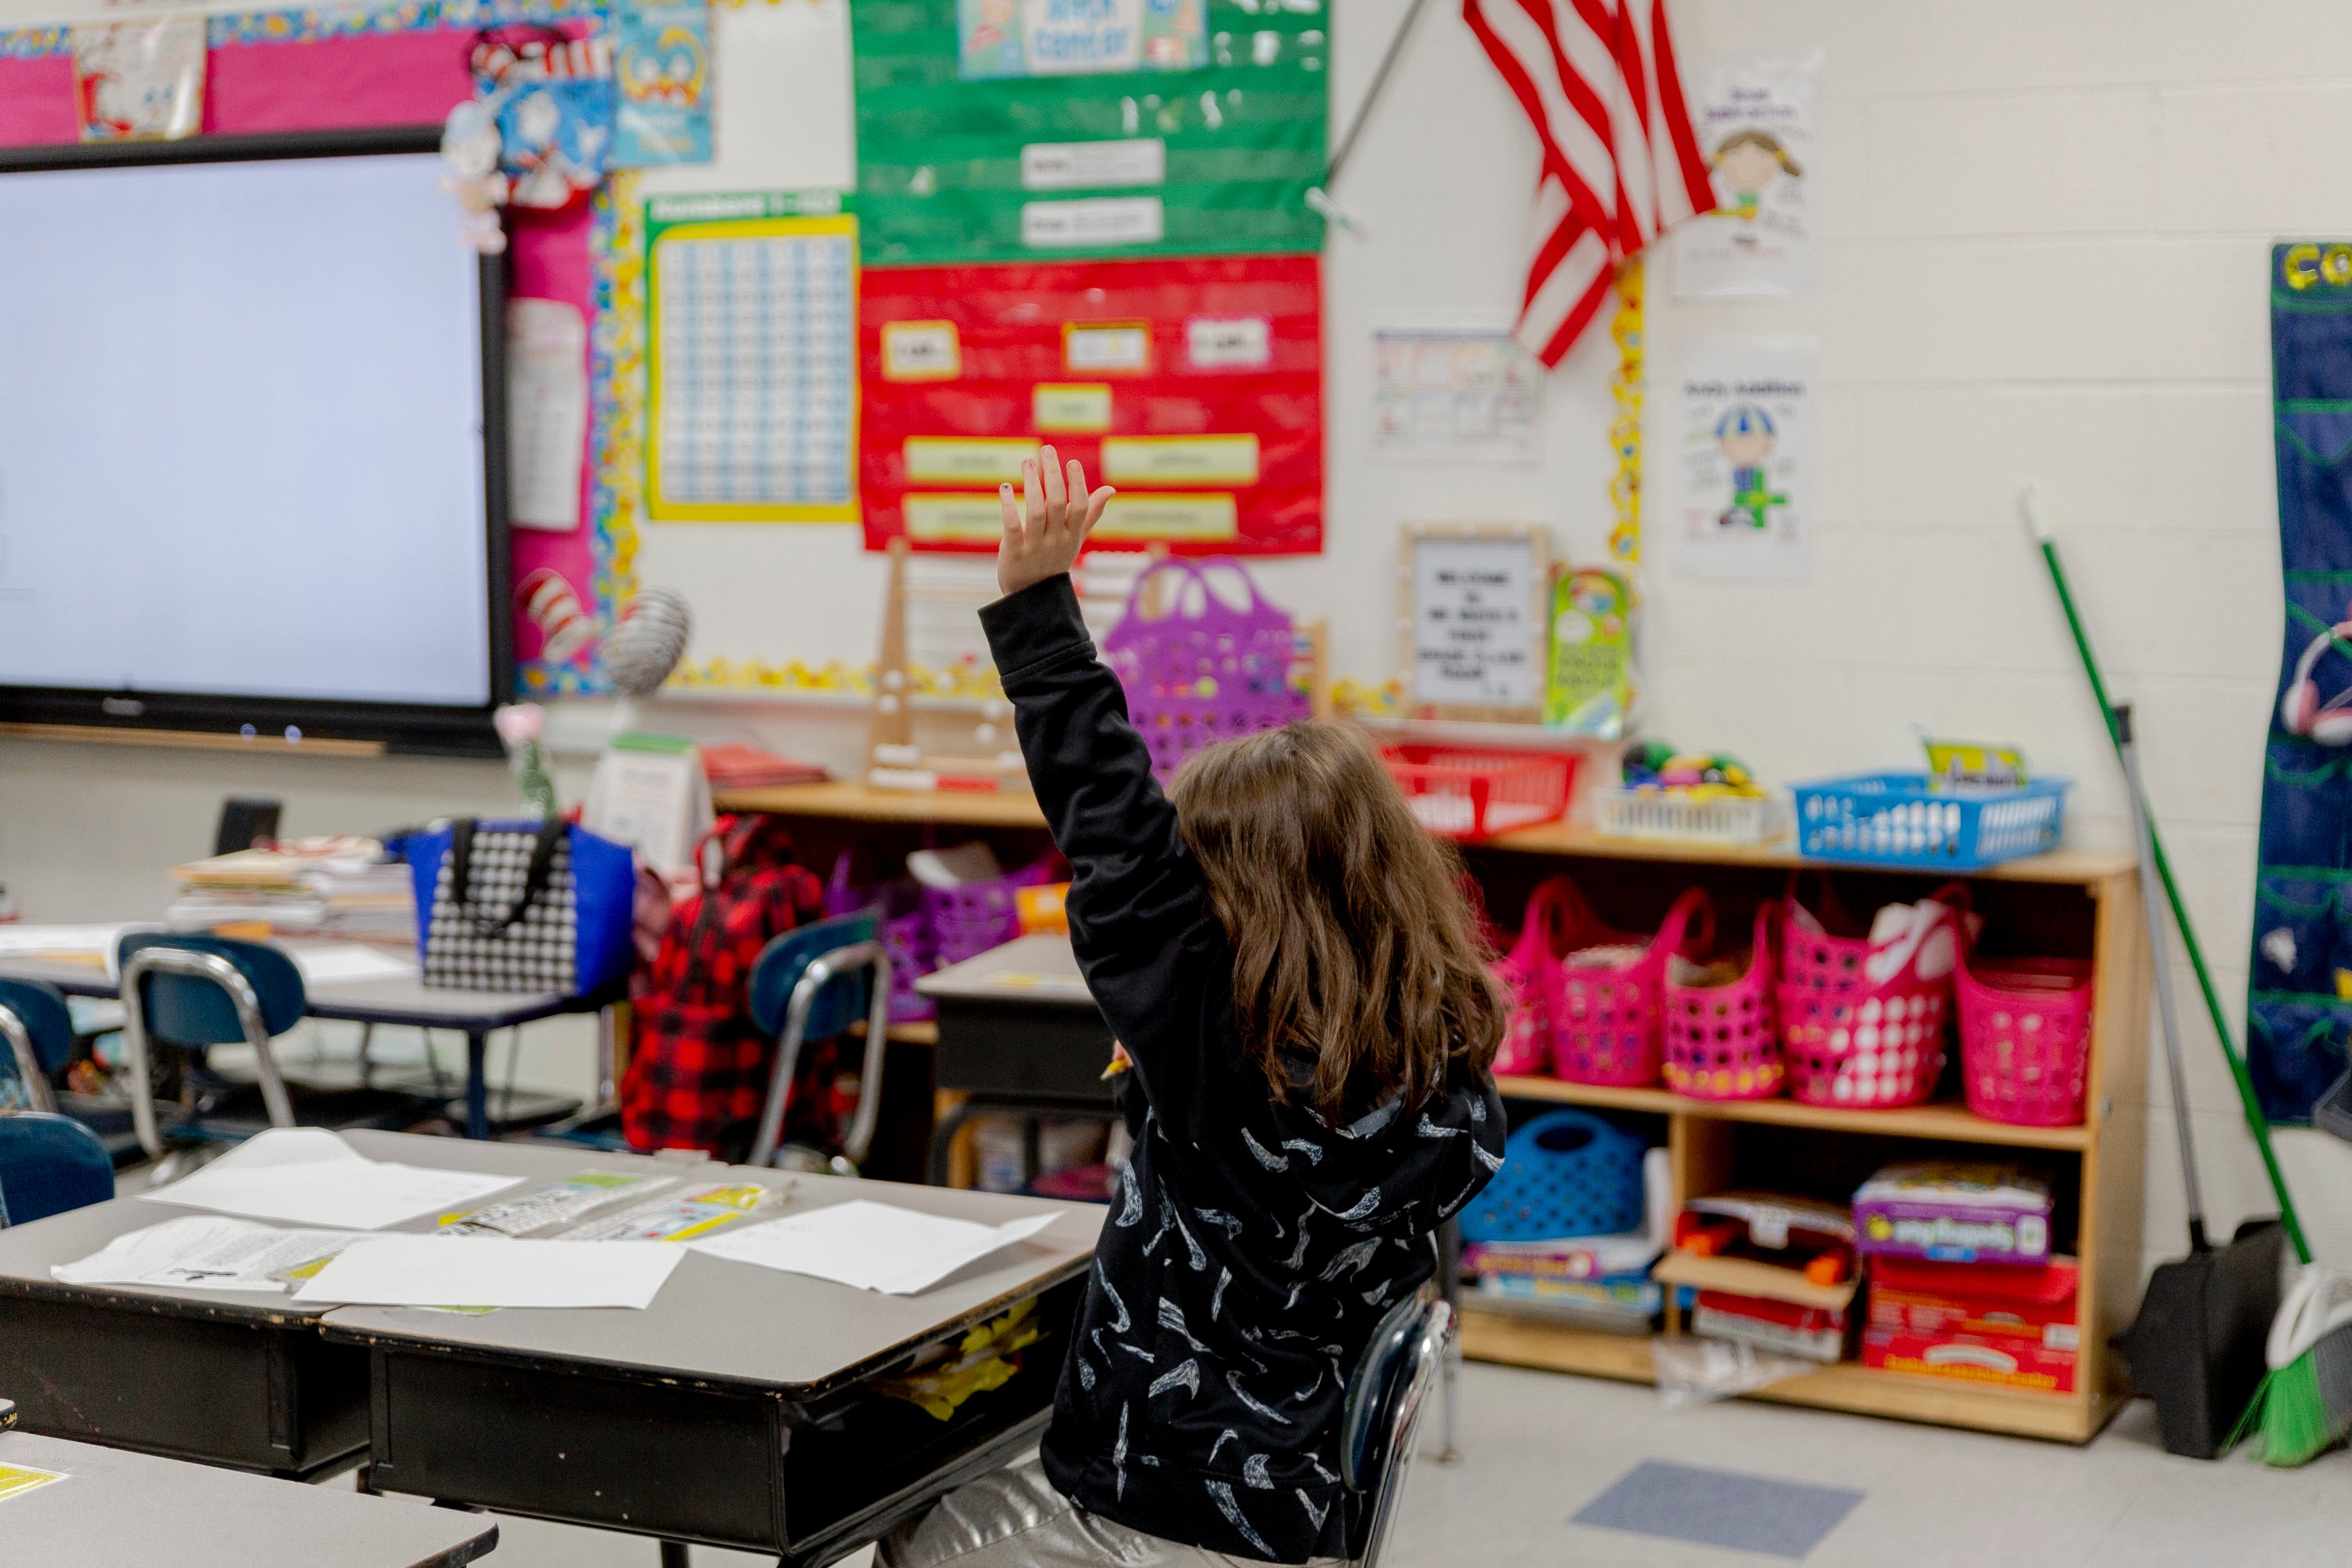 A second-grader raises her hand in a classroom.